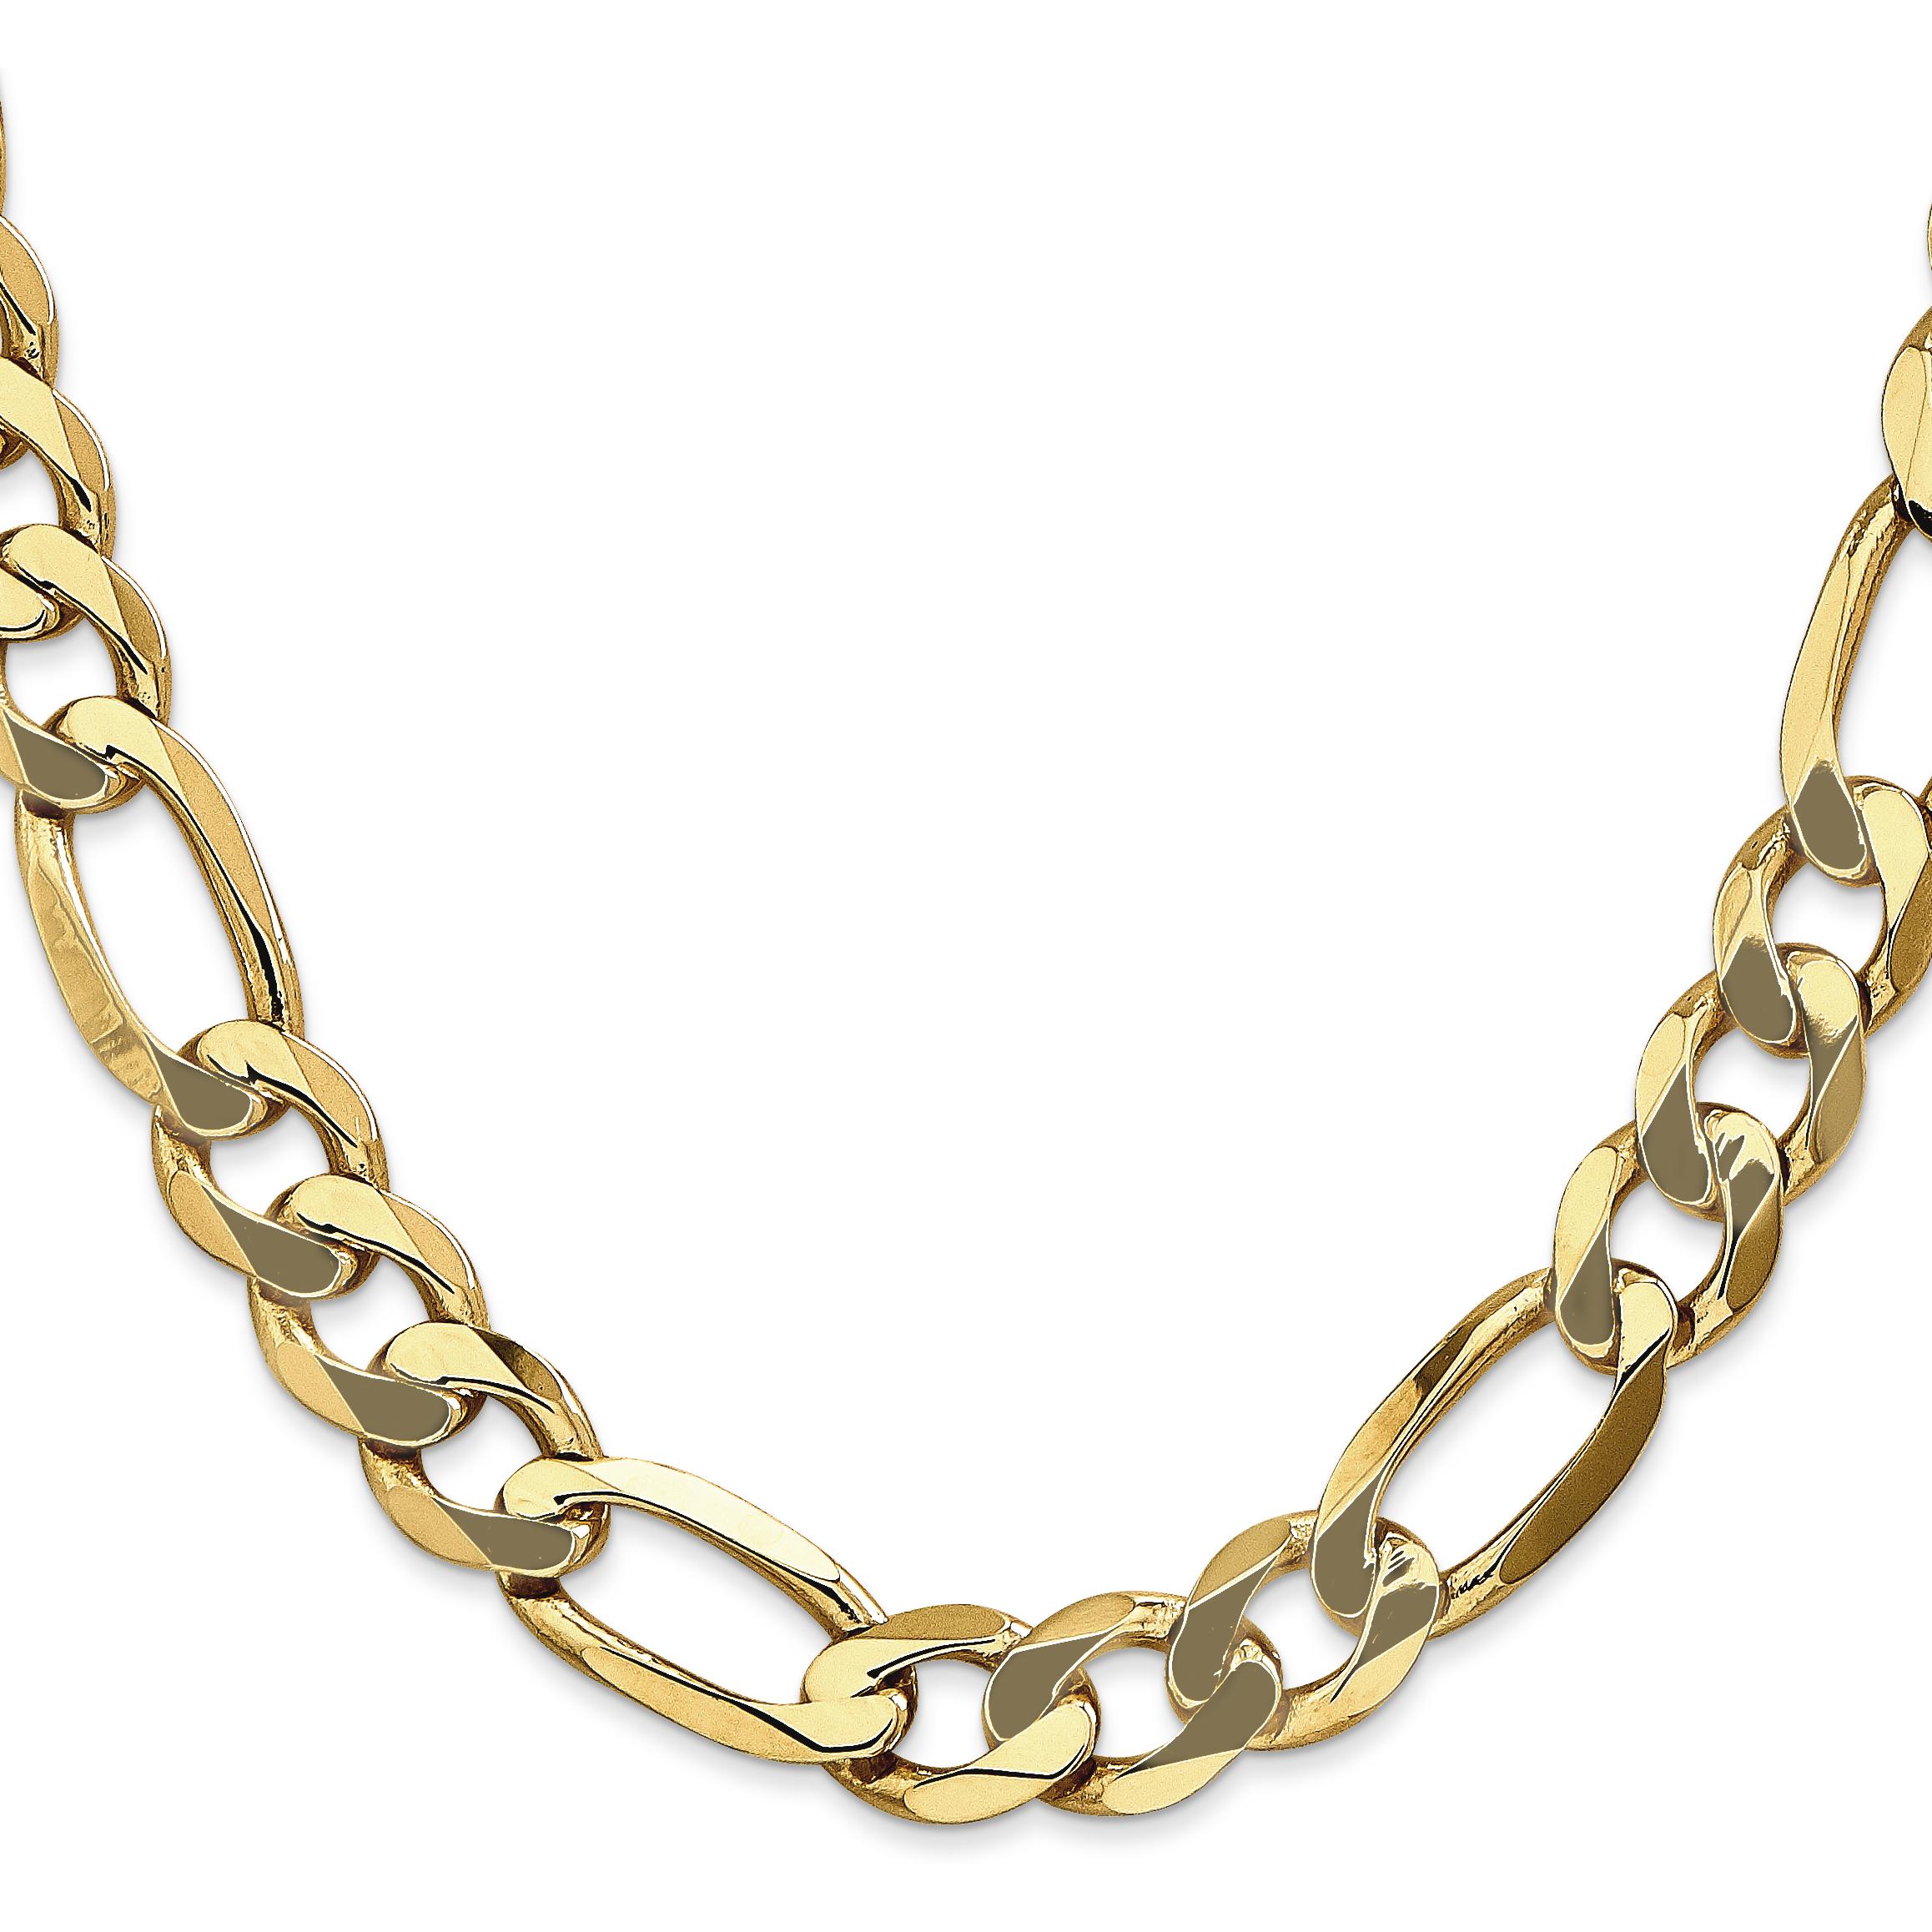 Findingking 14K Gold Flat Figaro Chain Necklace Jewelry 24" 10mm